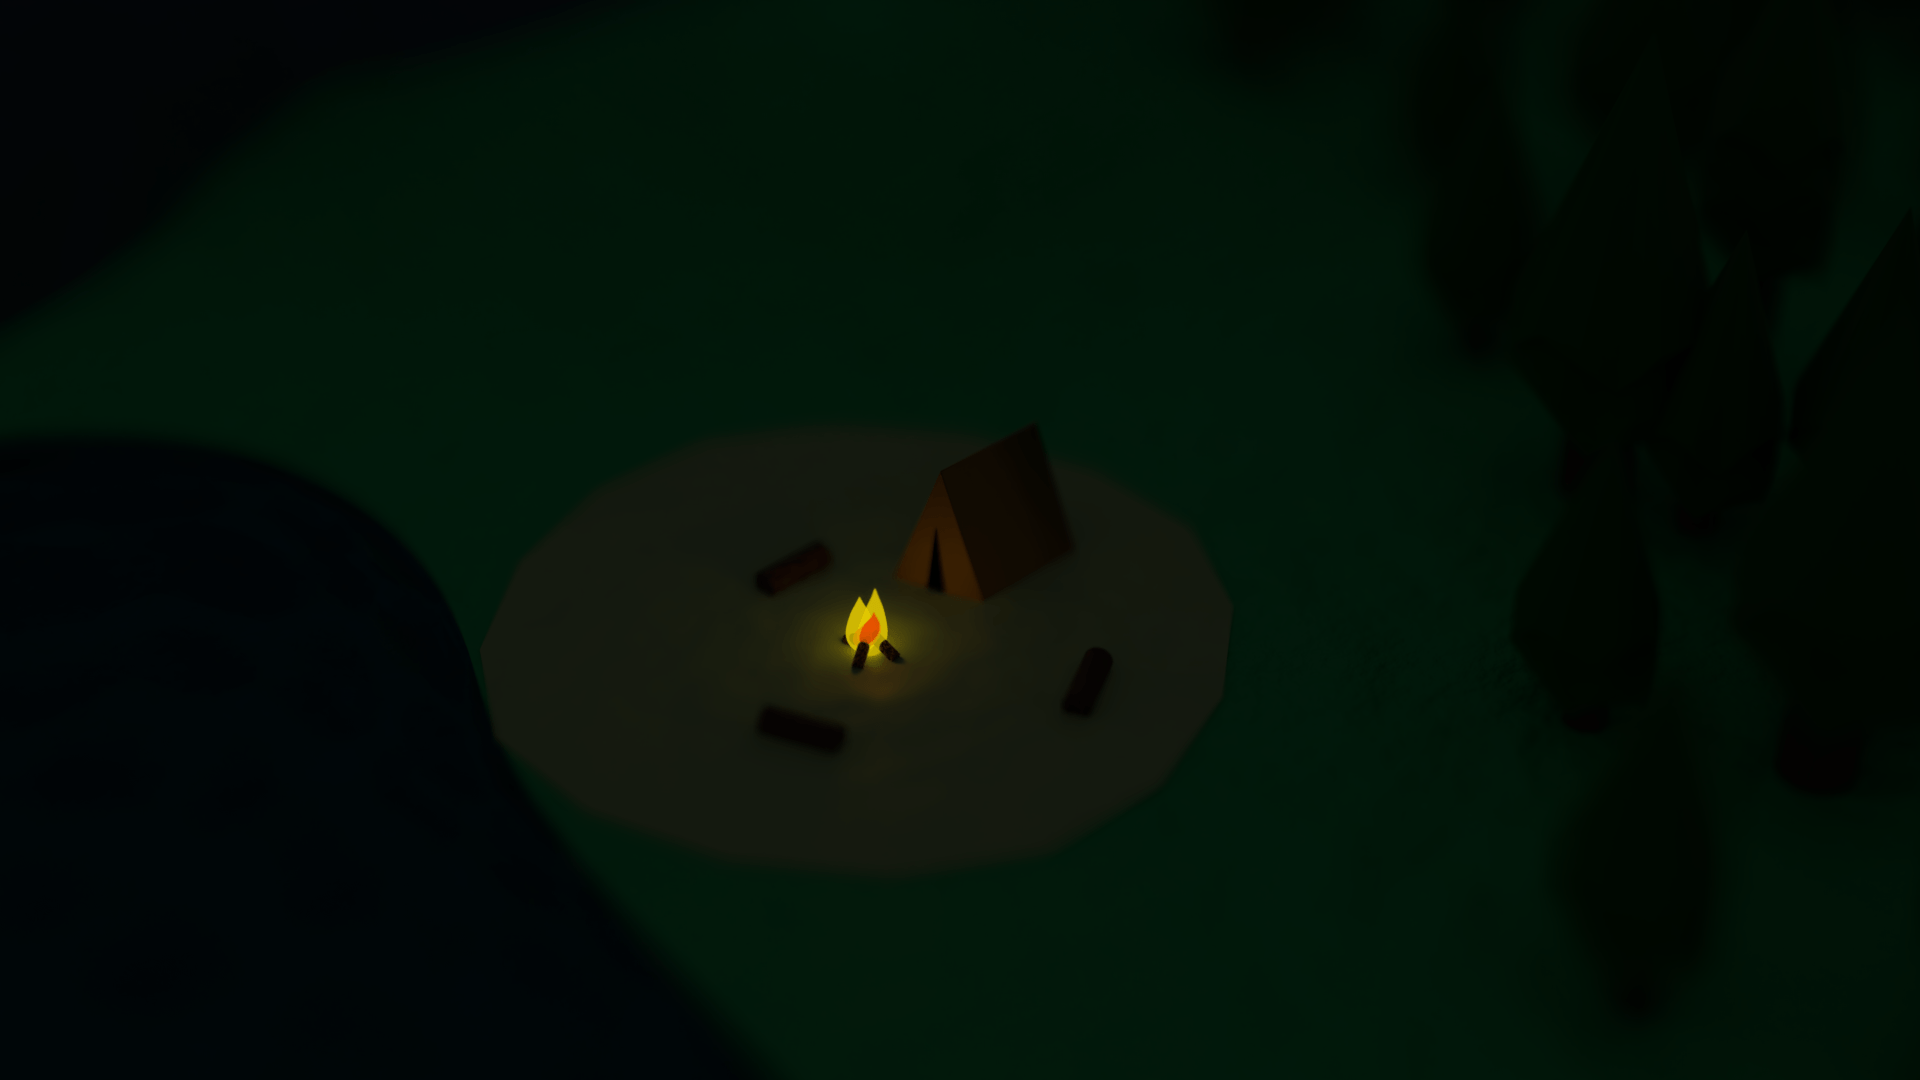 Here's a little campsite at night I made [1080p]